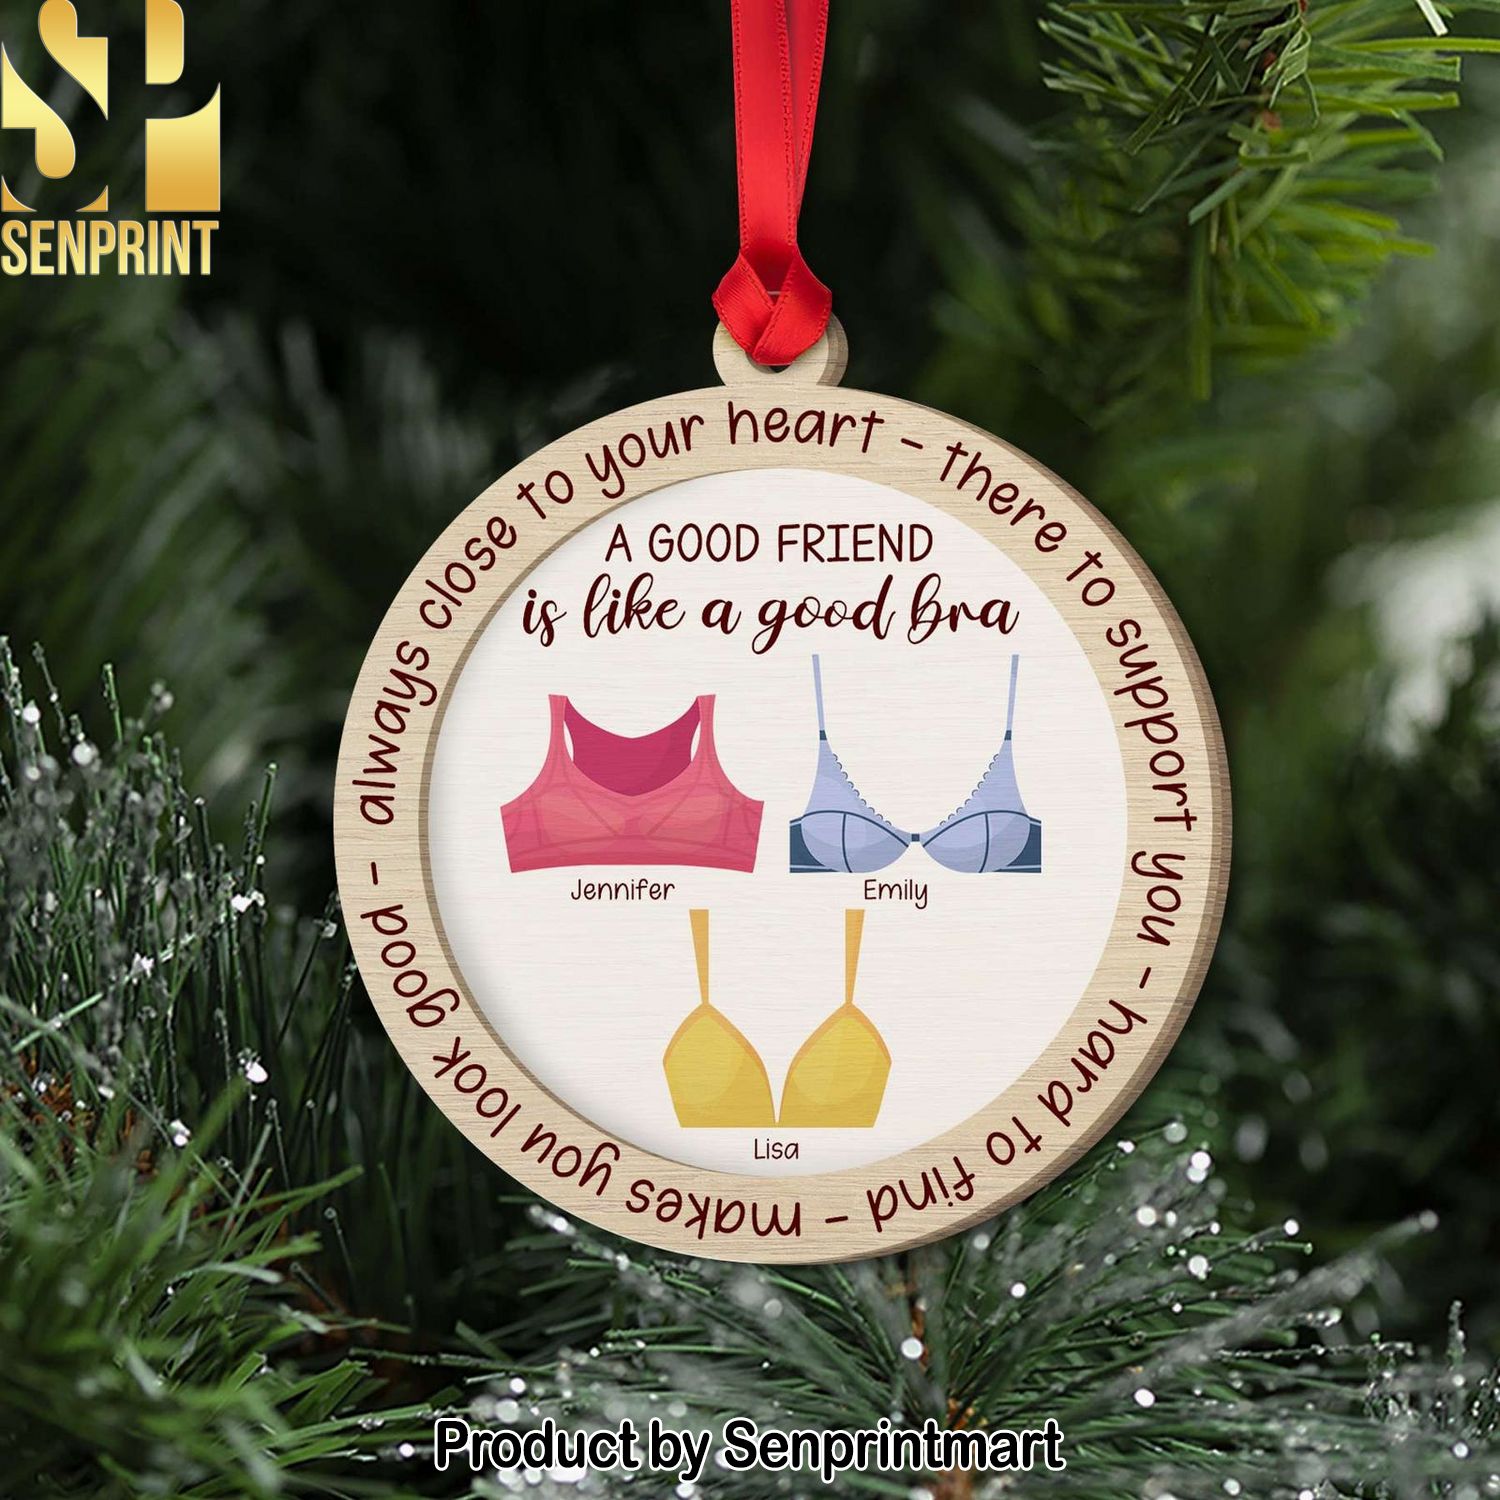 A Good Friend Is Like A Good Bra, Gift For Friends, Personalized Wood Ornament, Bralette Friends Ornament, Christmas Gift